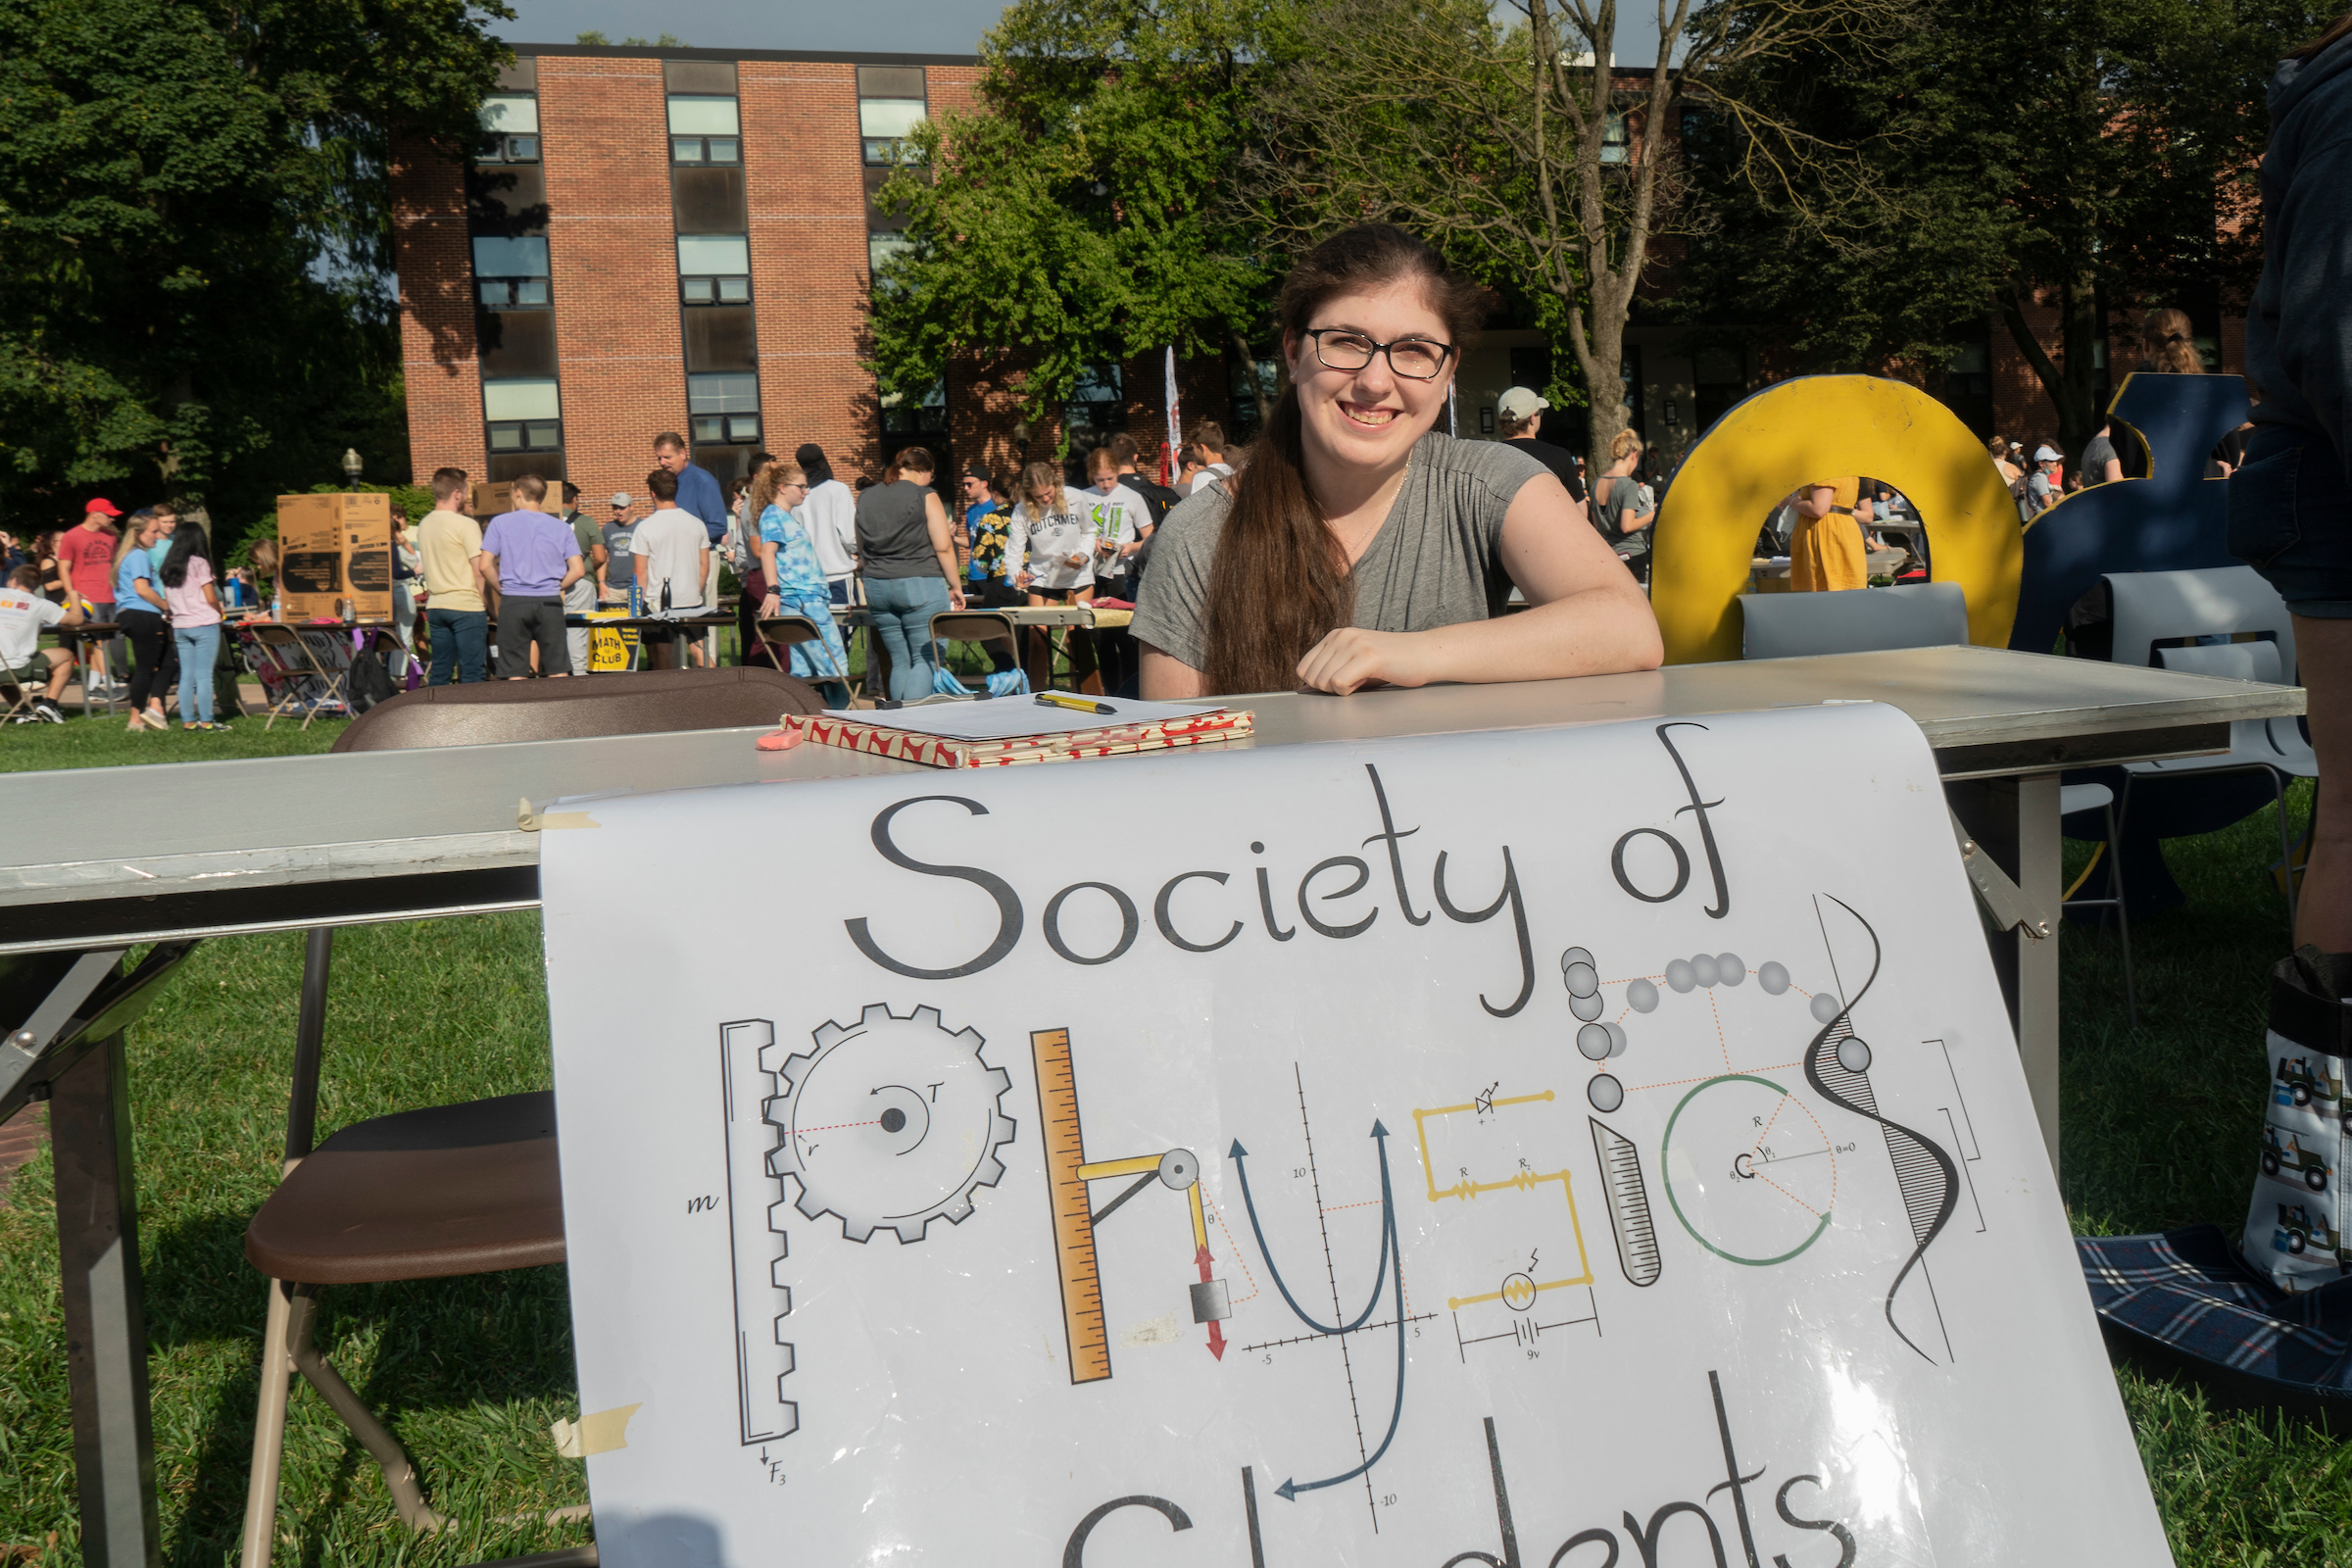 Society of Physics Students table at LVC Student Engagement Fair